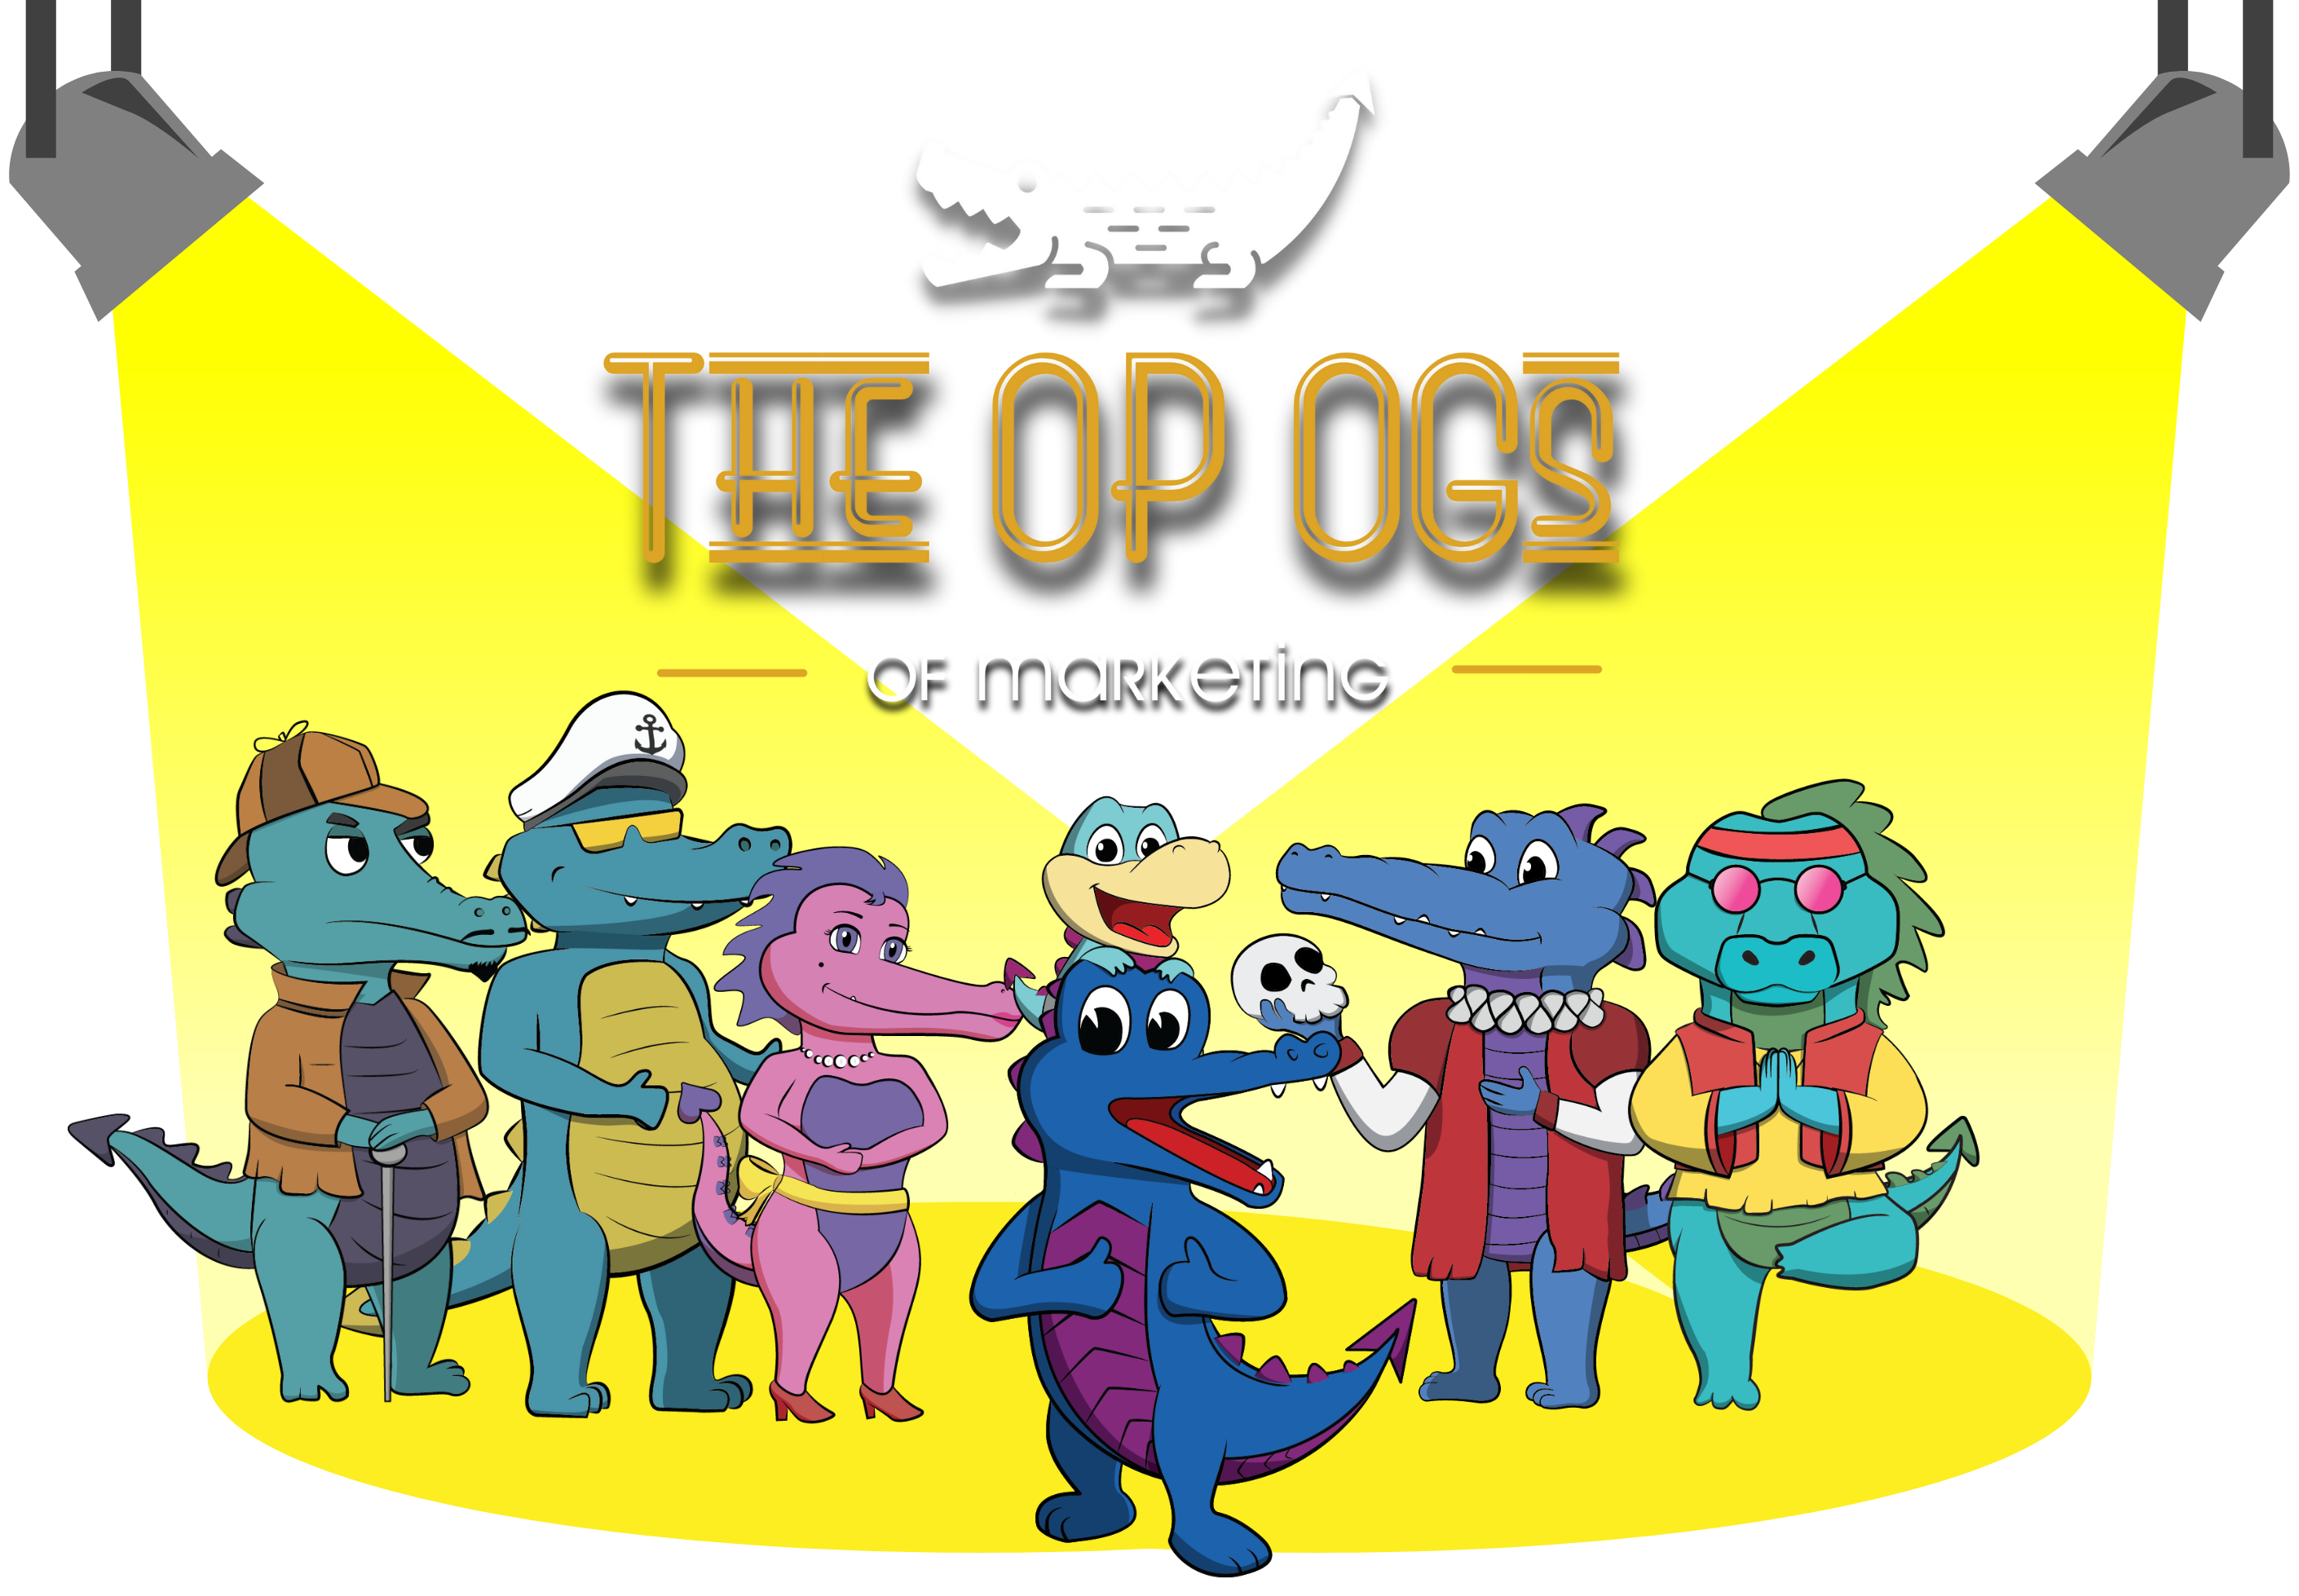 The GatorVerse Mascots and The OP OGs of Marketing